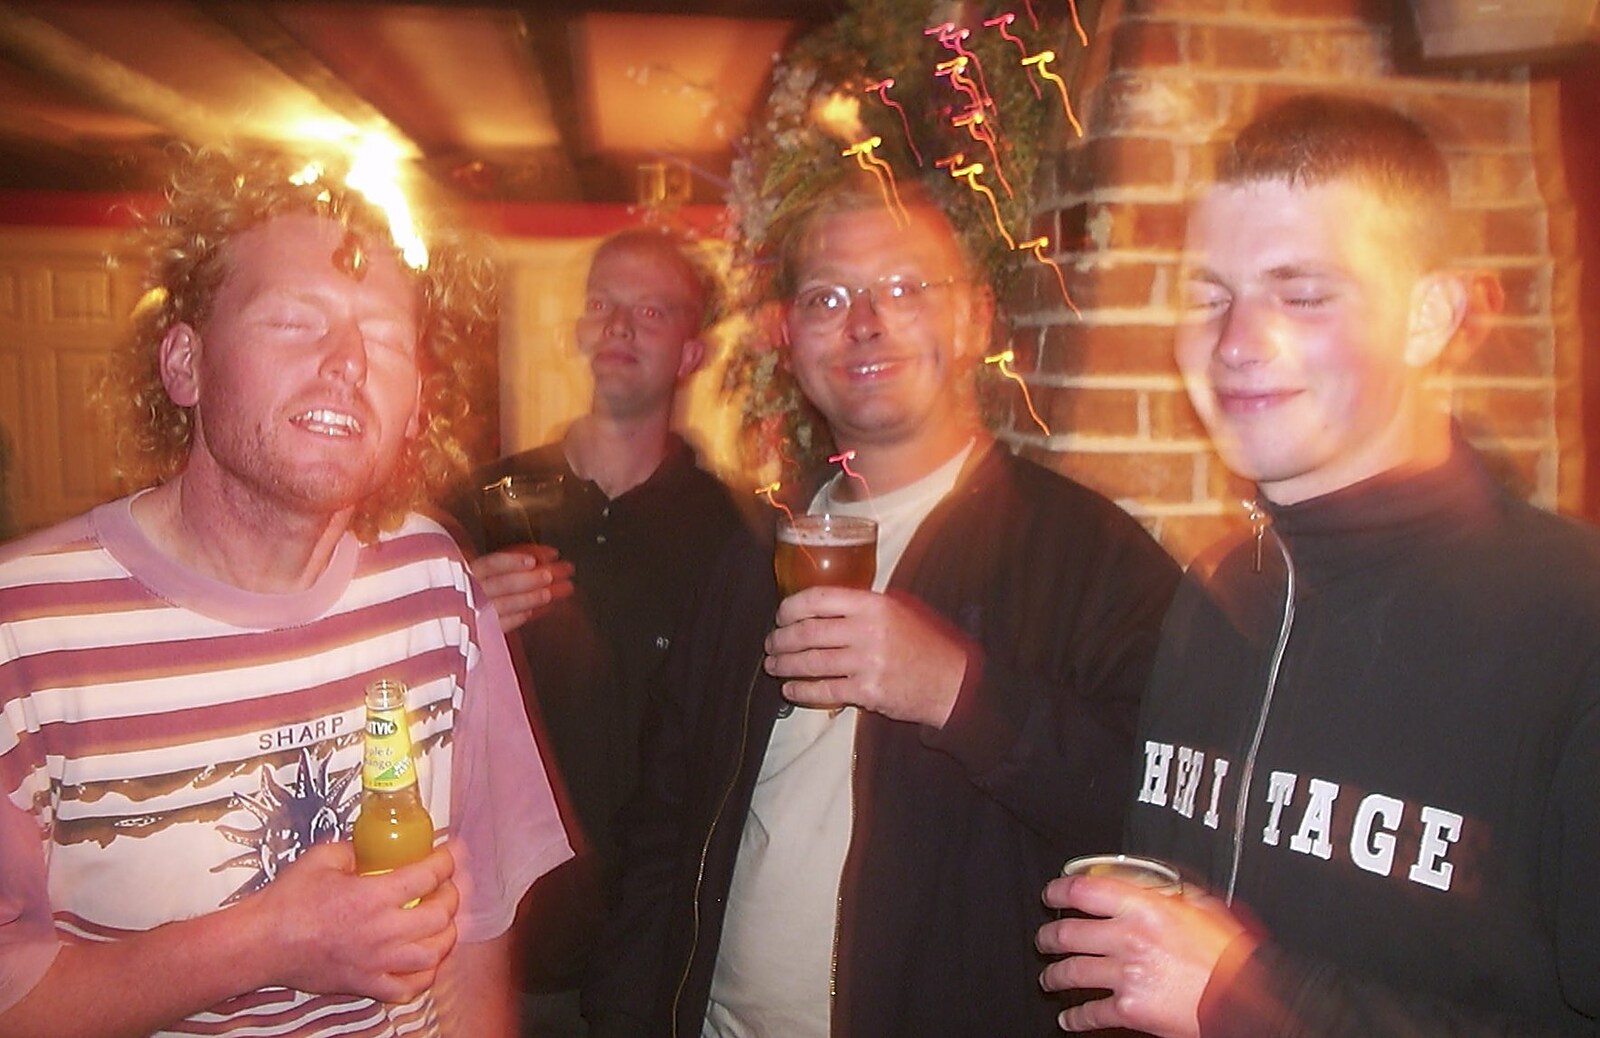 Mark Joseph at Revs, and the BSCC at Hoxne and Wortham - 30th September 2004: Wavy, Paul, Marc and Phil in the Dolphin